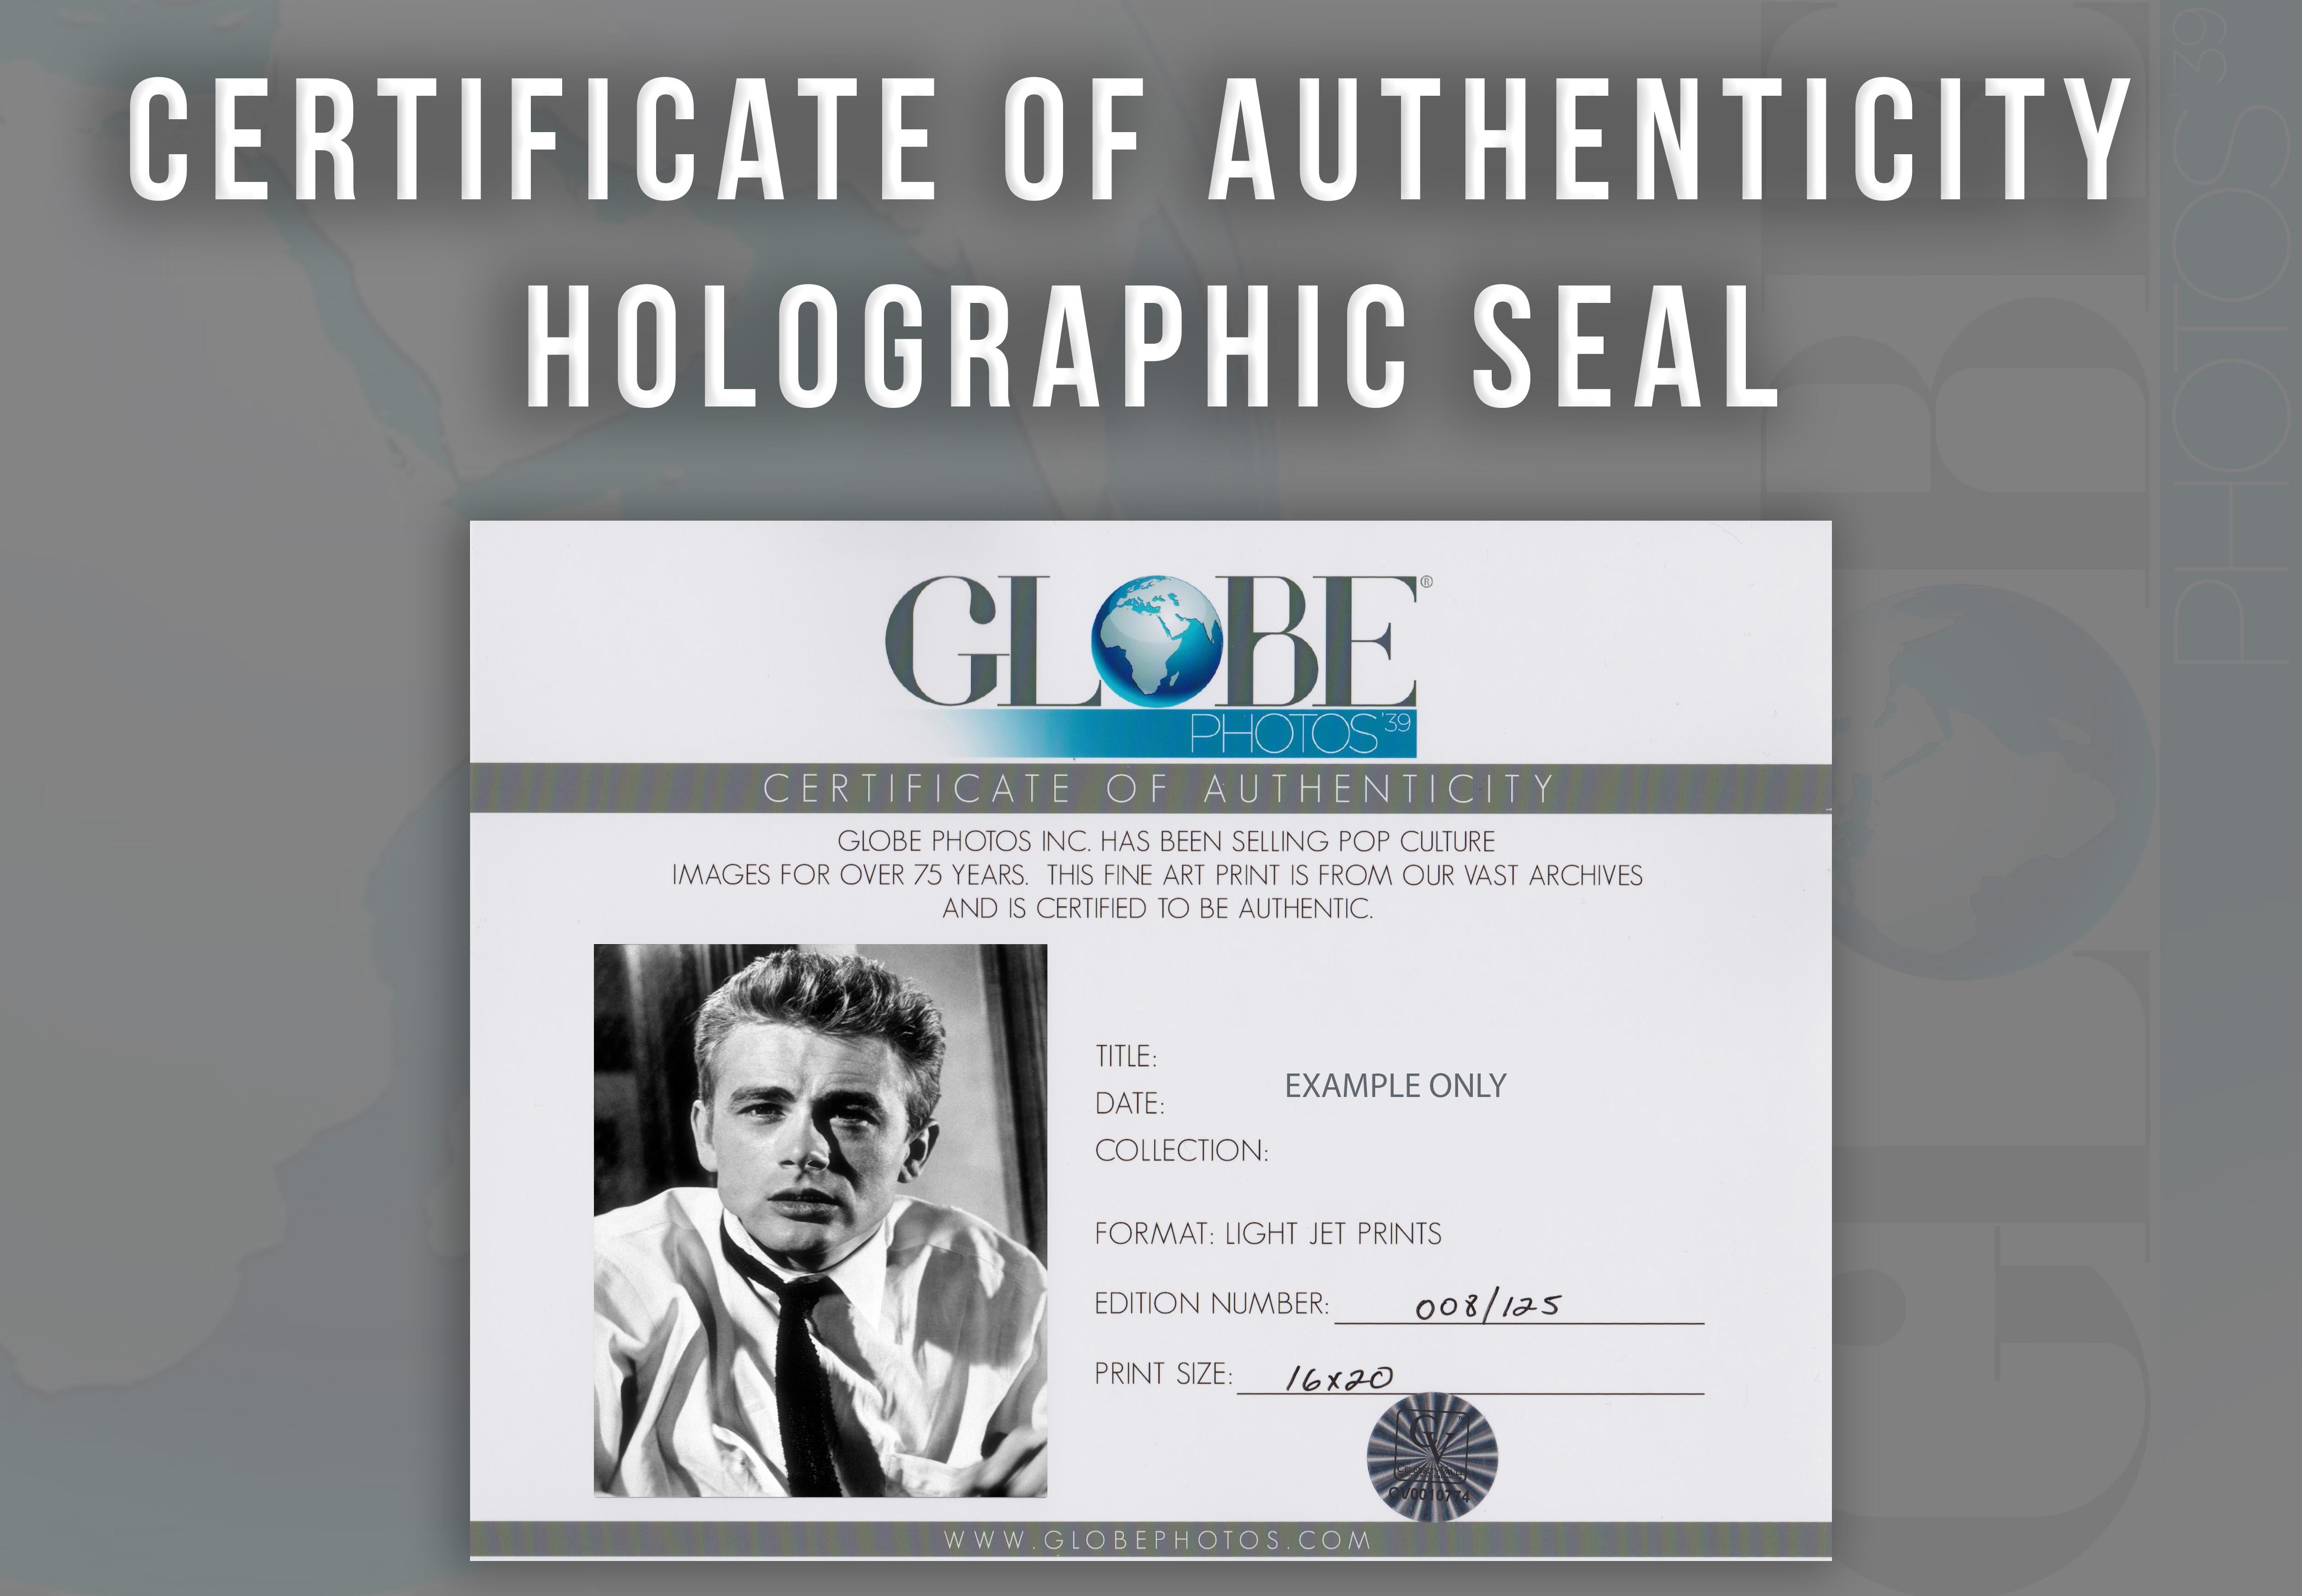 James Dean in Rebel Without a Cause Globe Photos Fine Art Print - Gray Black and White Photograph by Unknown